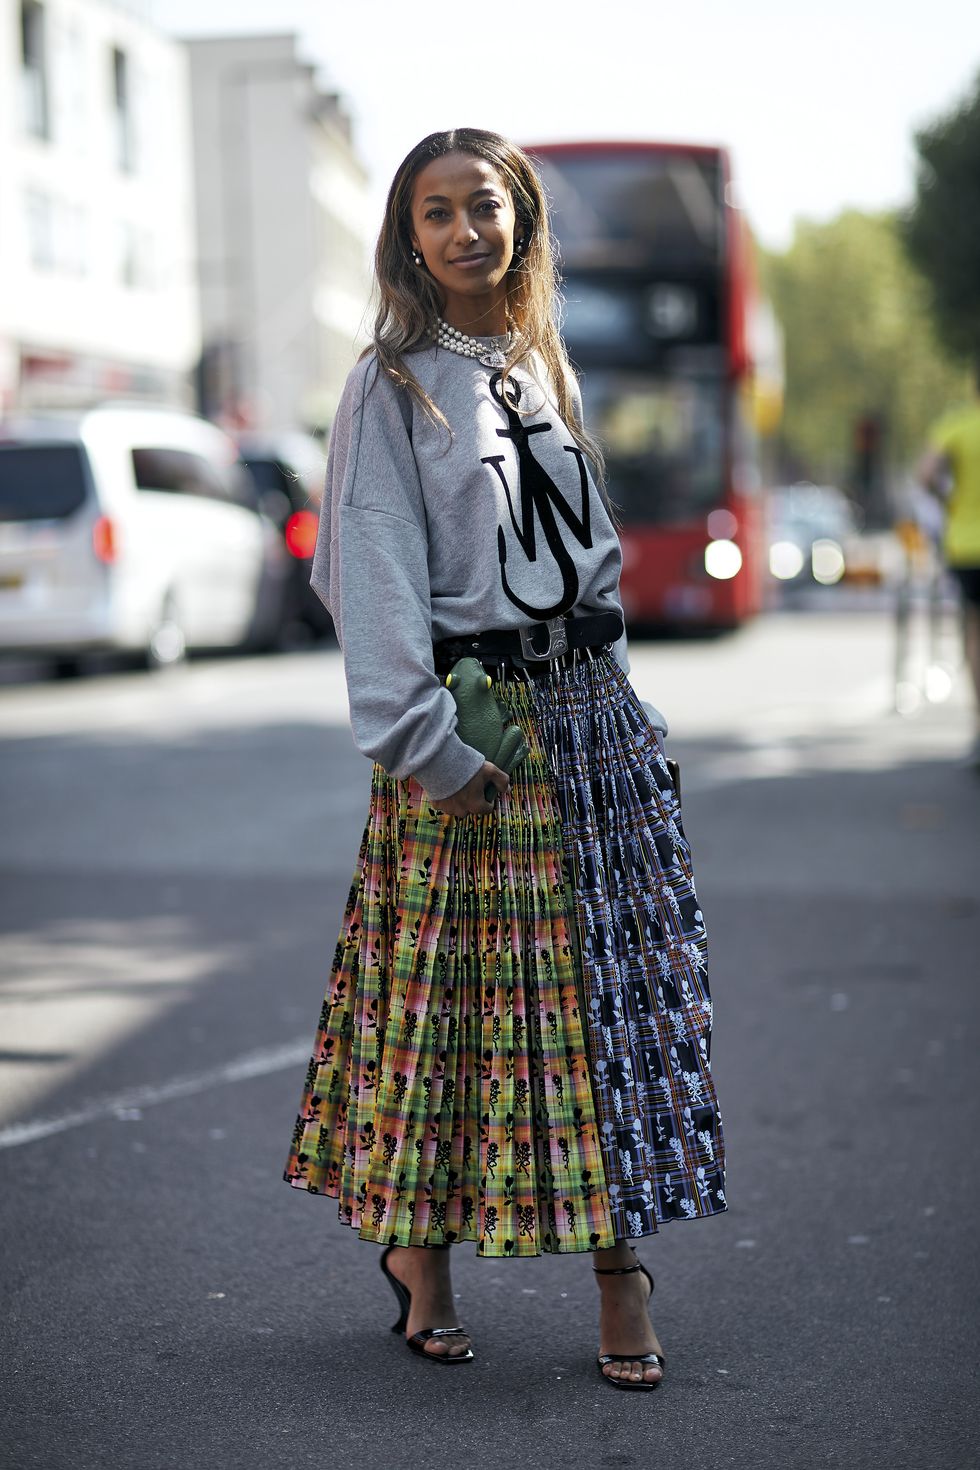 Best street style moments from London Fashion Week